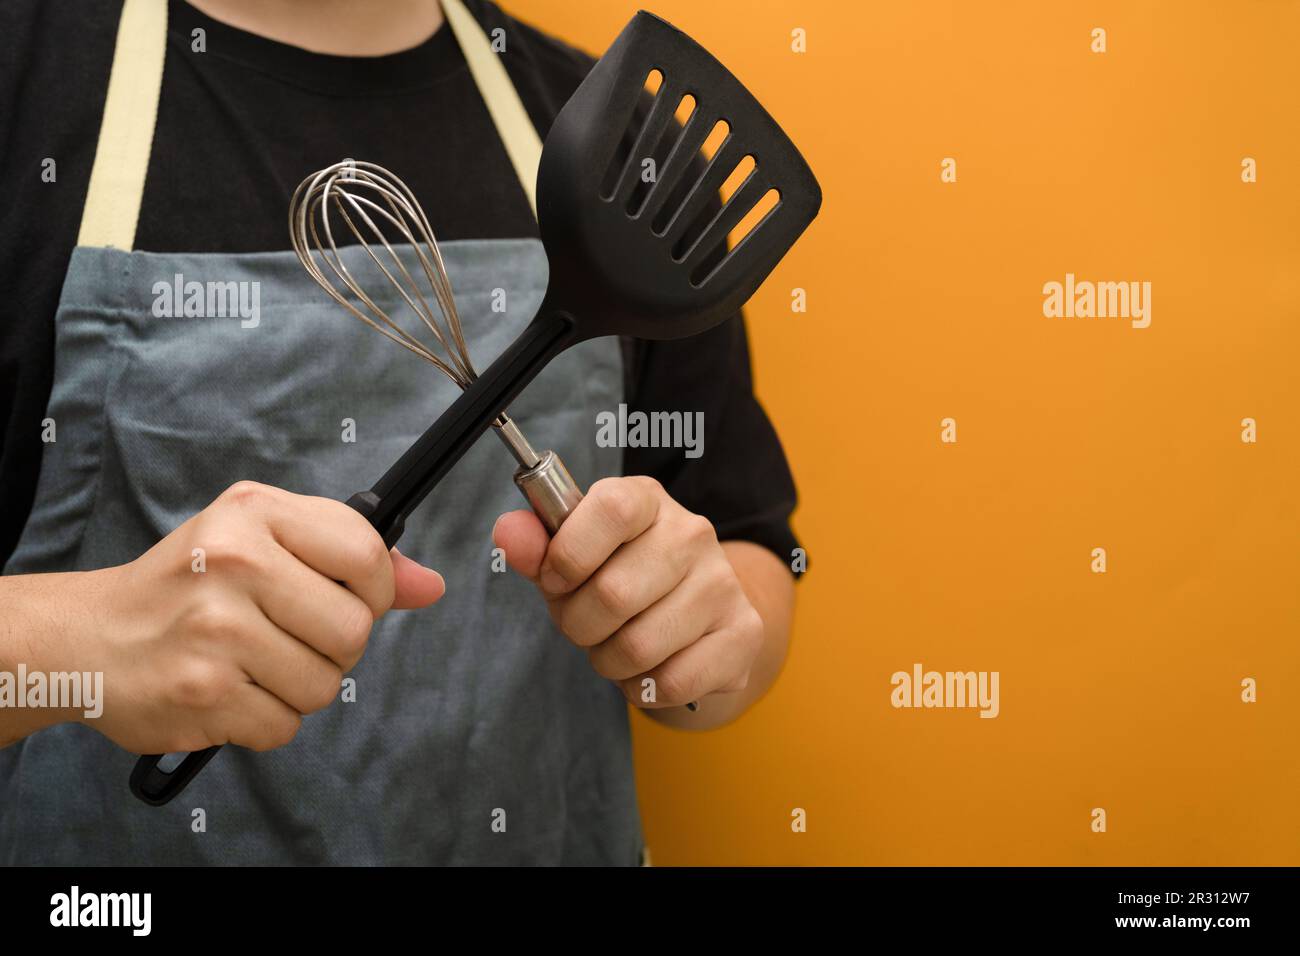 Man wearing apron holding whisks and kitchen spatula standing against yellow background with space Stock Photo